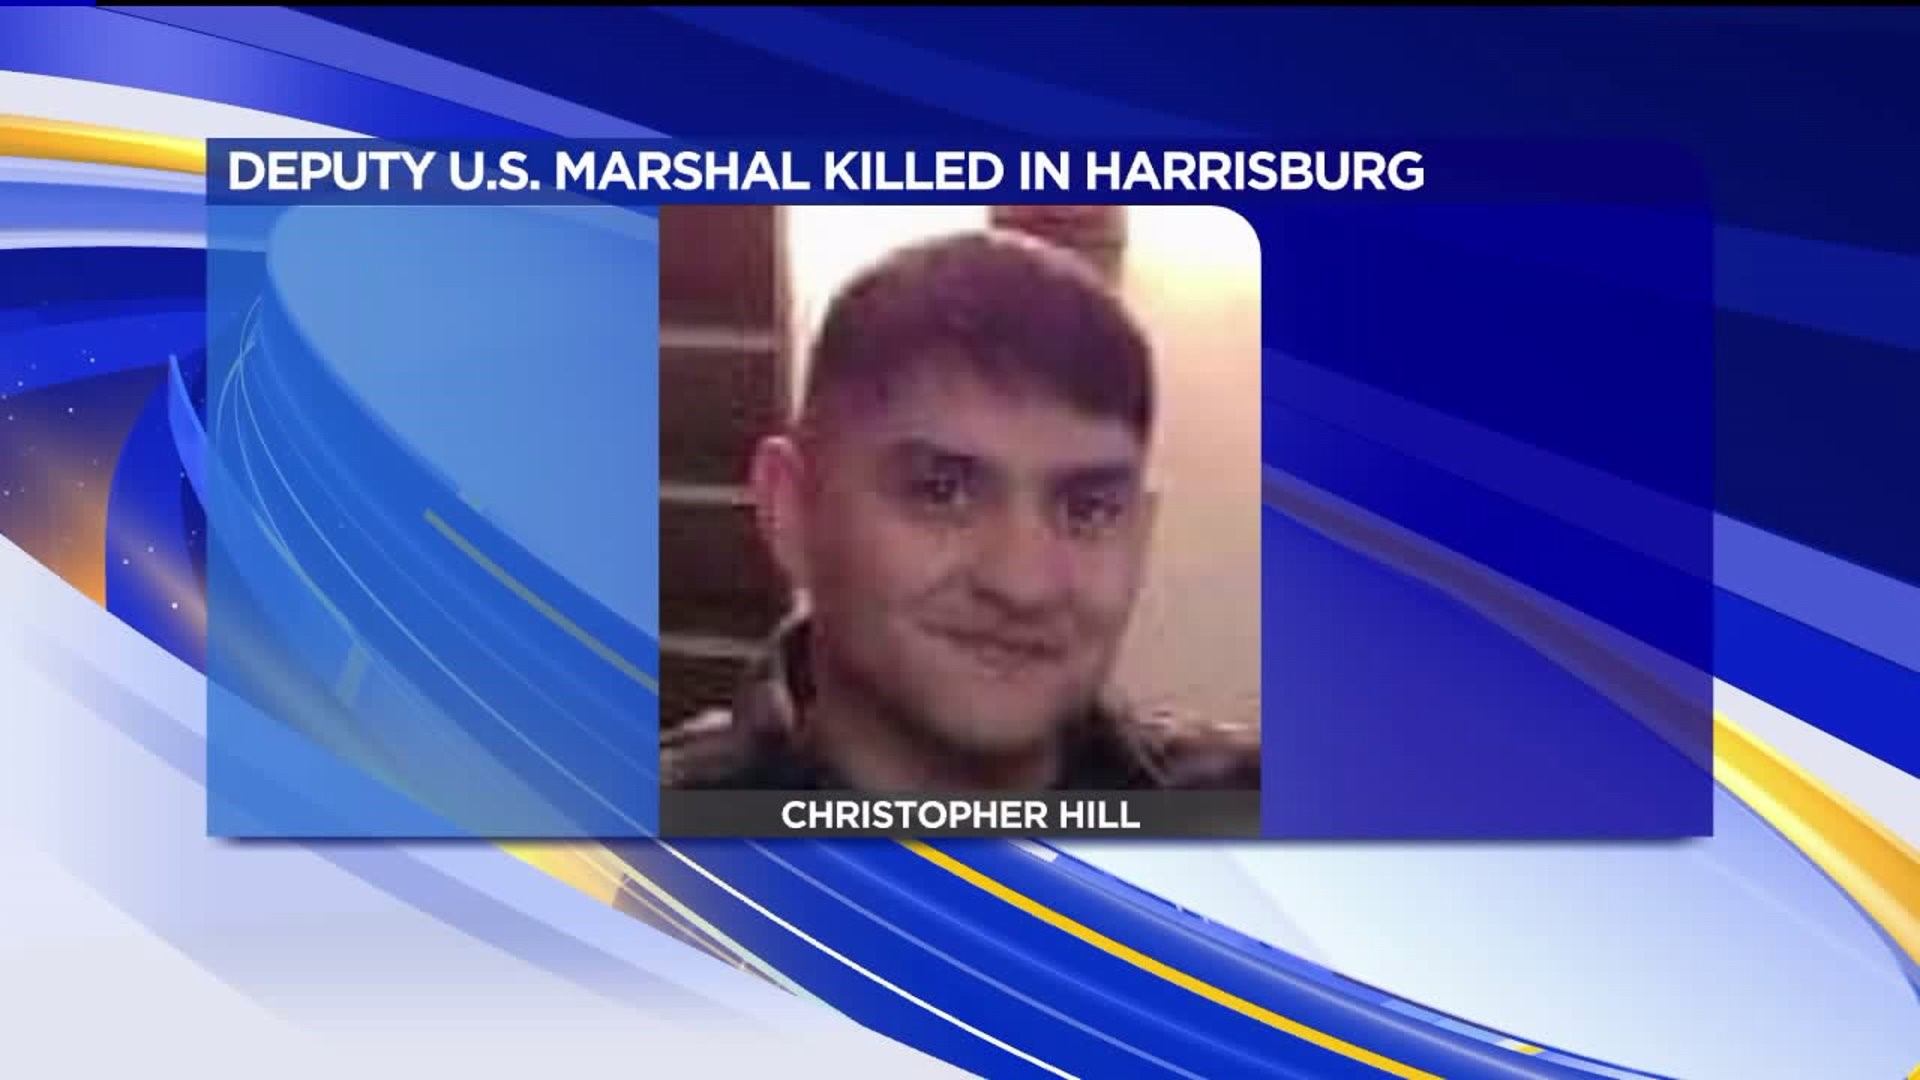 D.A.: U.S. Marshal Christopher Hill Killed by Friendly Fire